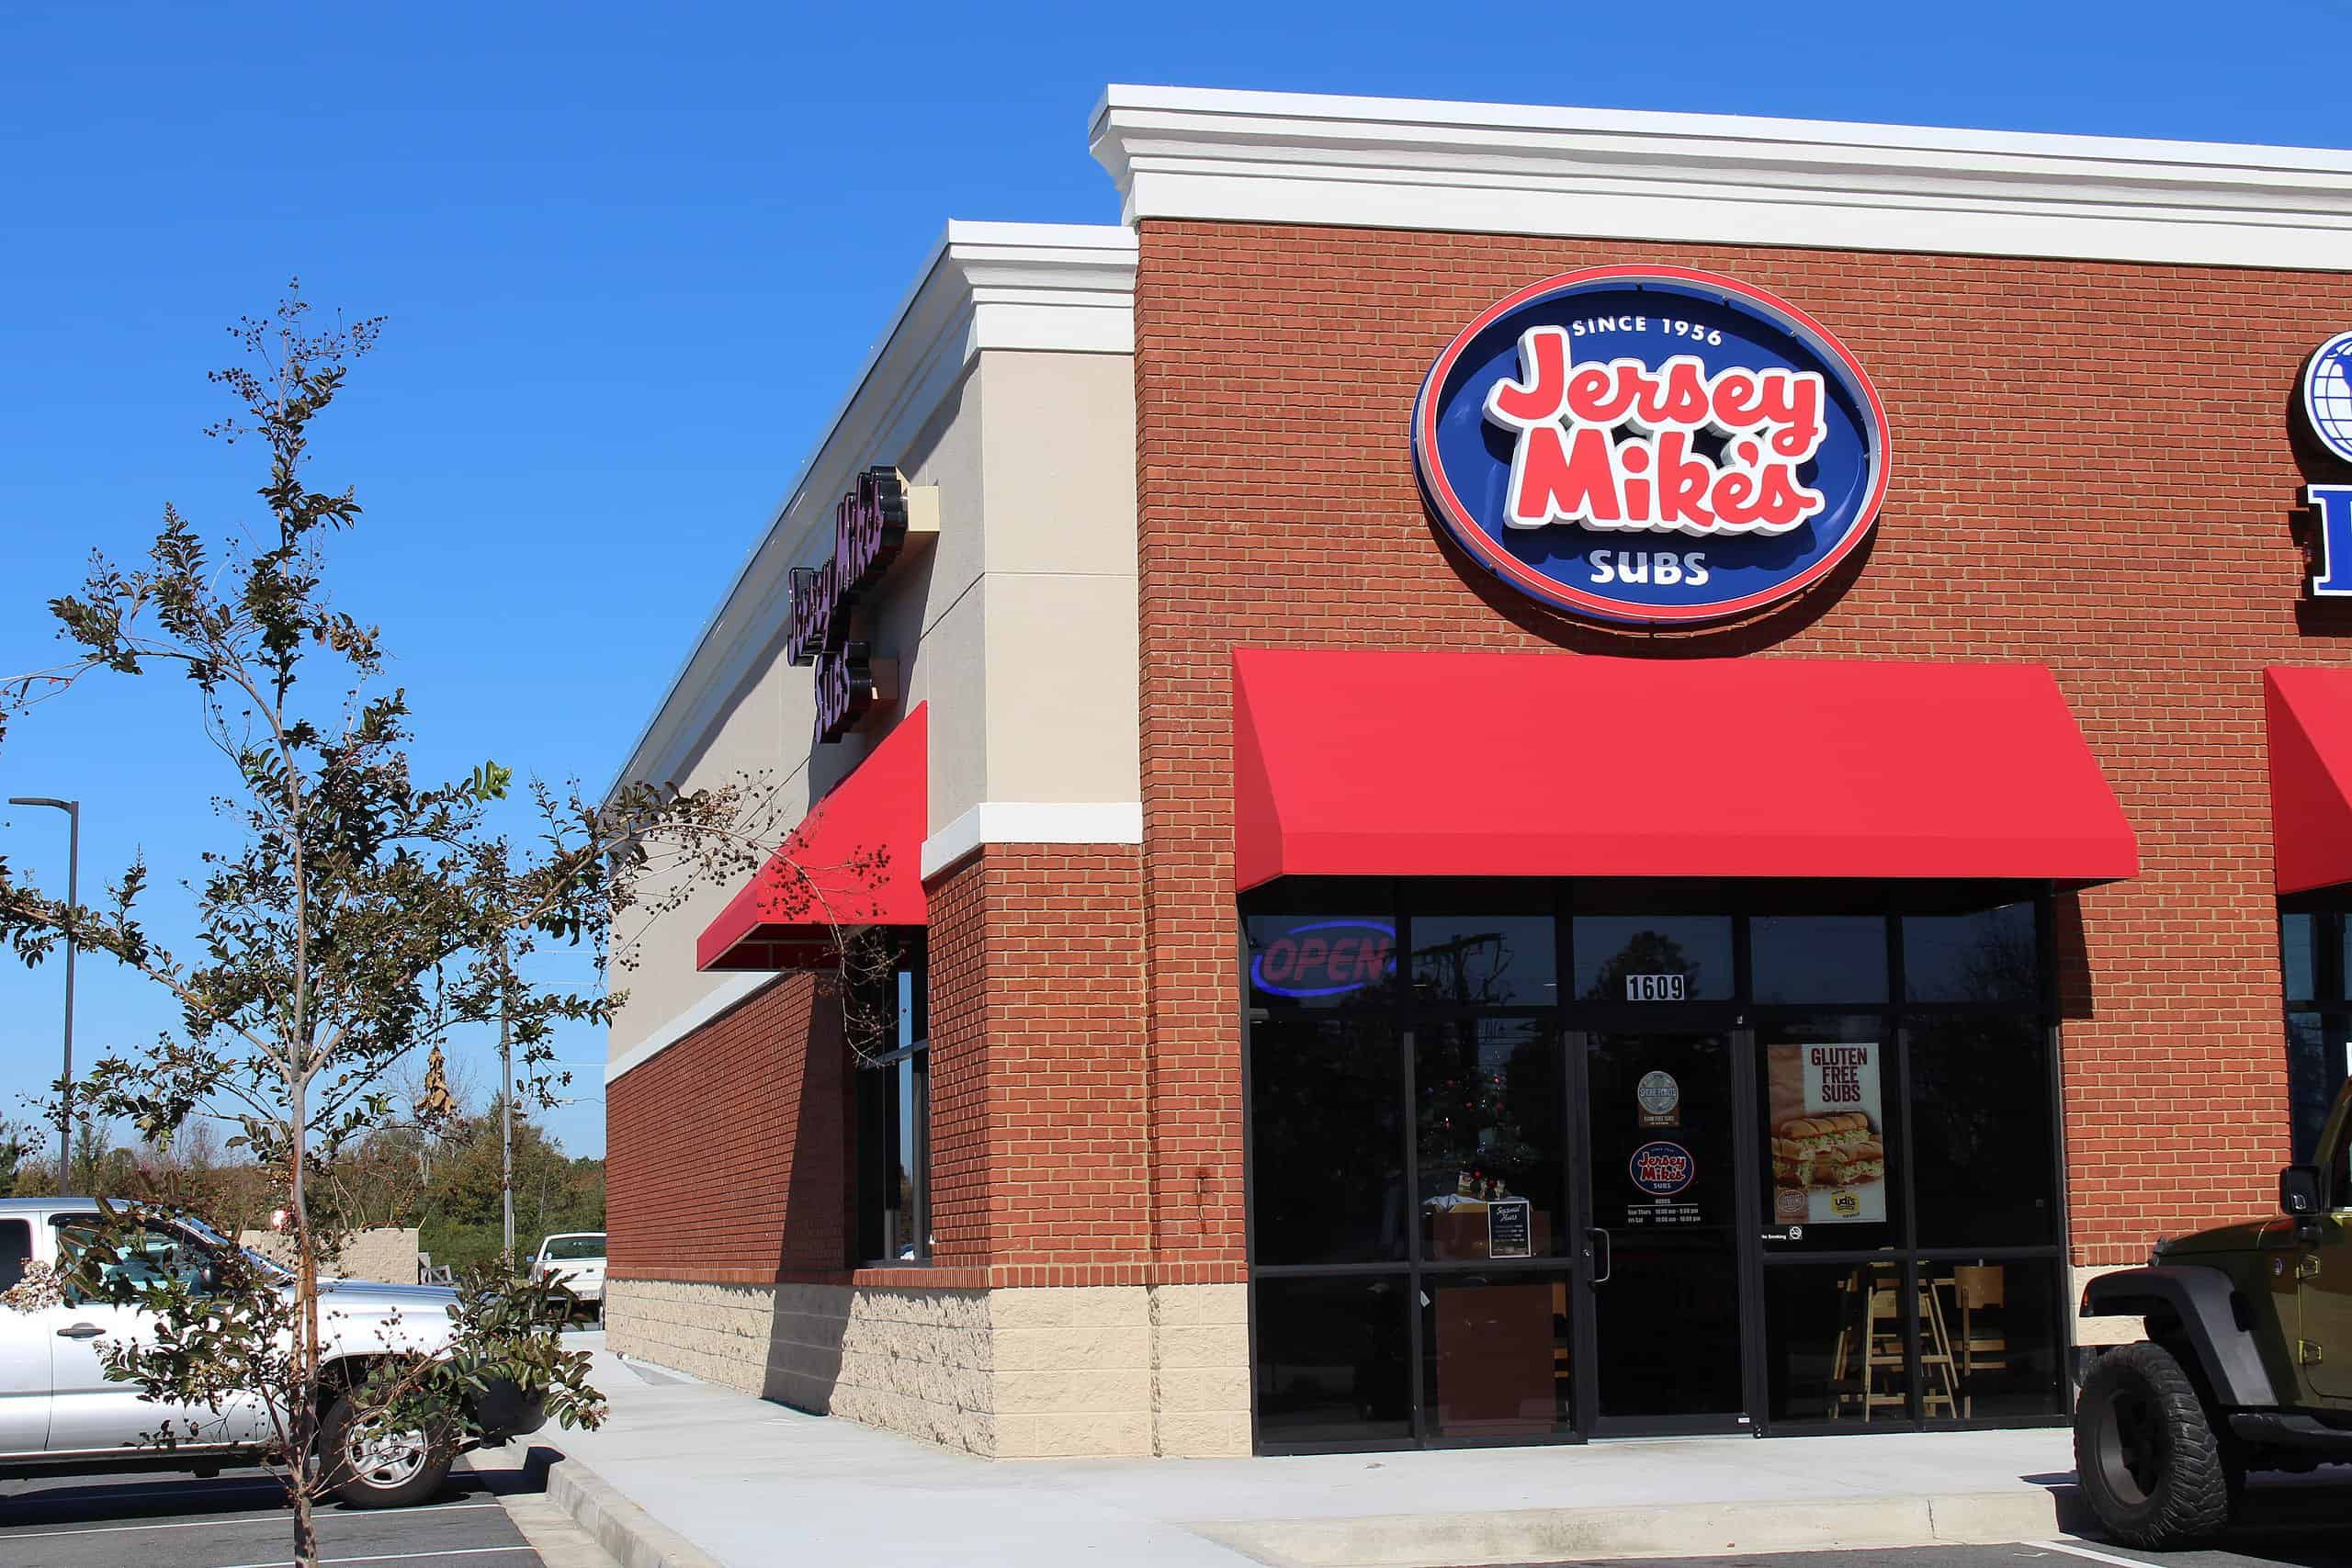 Jersey Mikes Subs by Michael Rivera